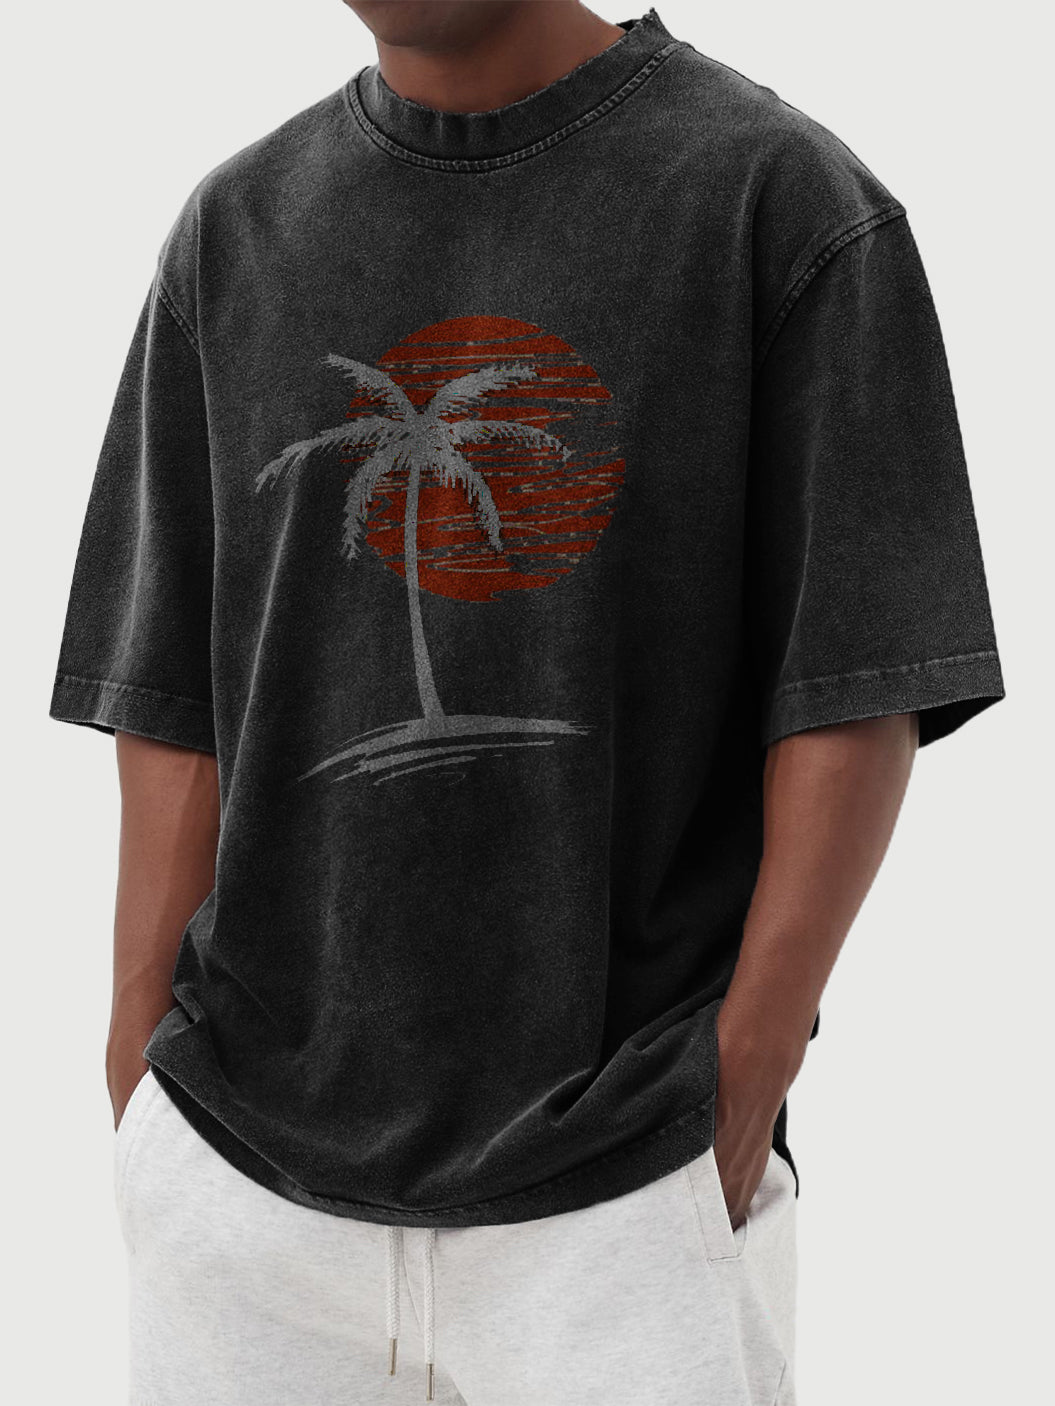 Men's Washed Distressed Cotton Palm Tree Print Casual Hawaiian Short-sleeved T-shirt